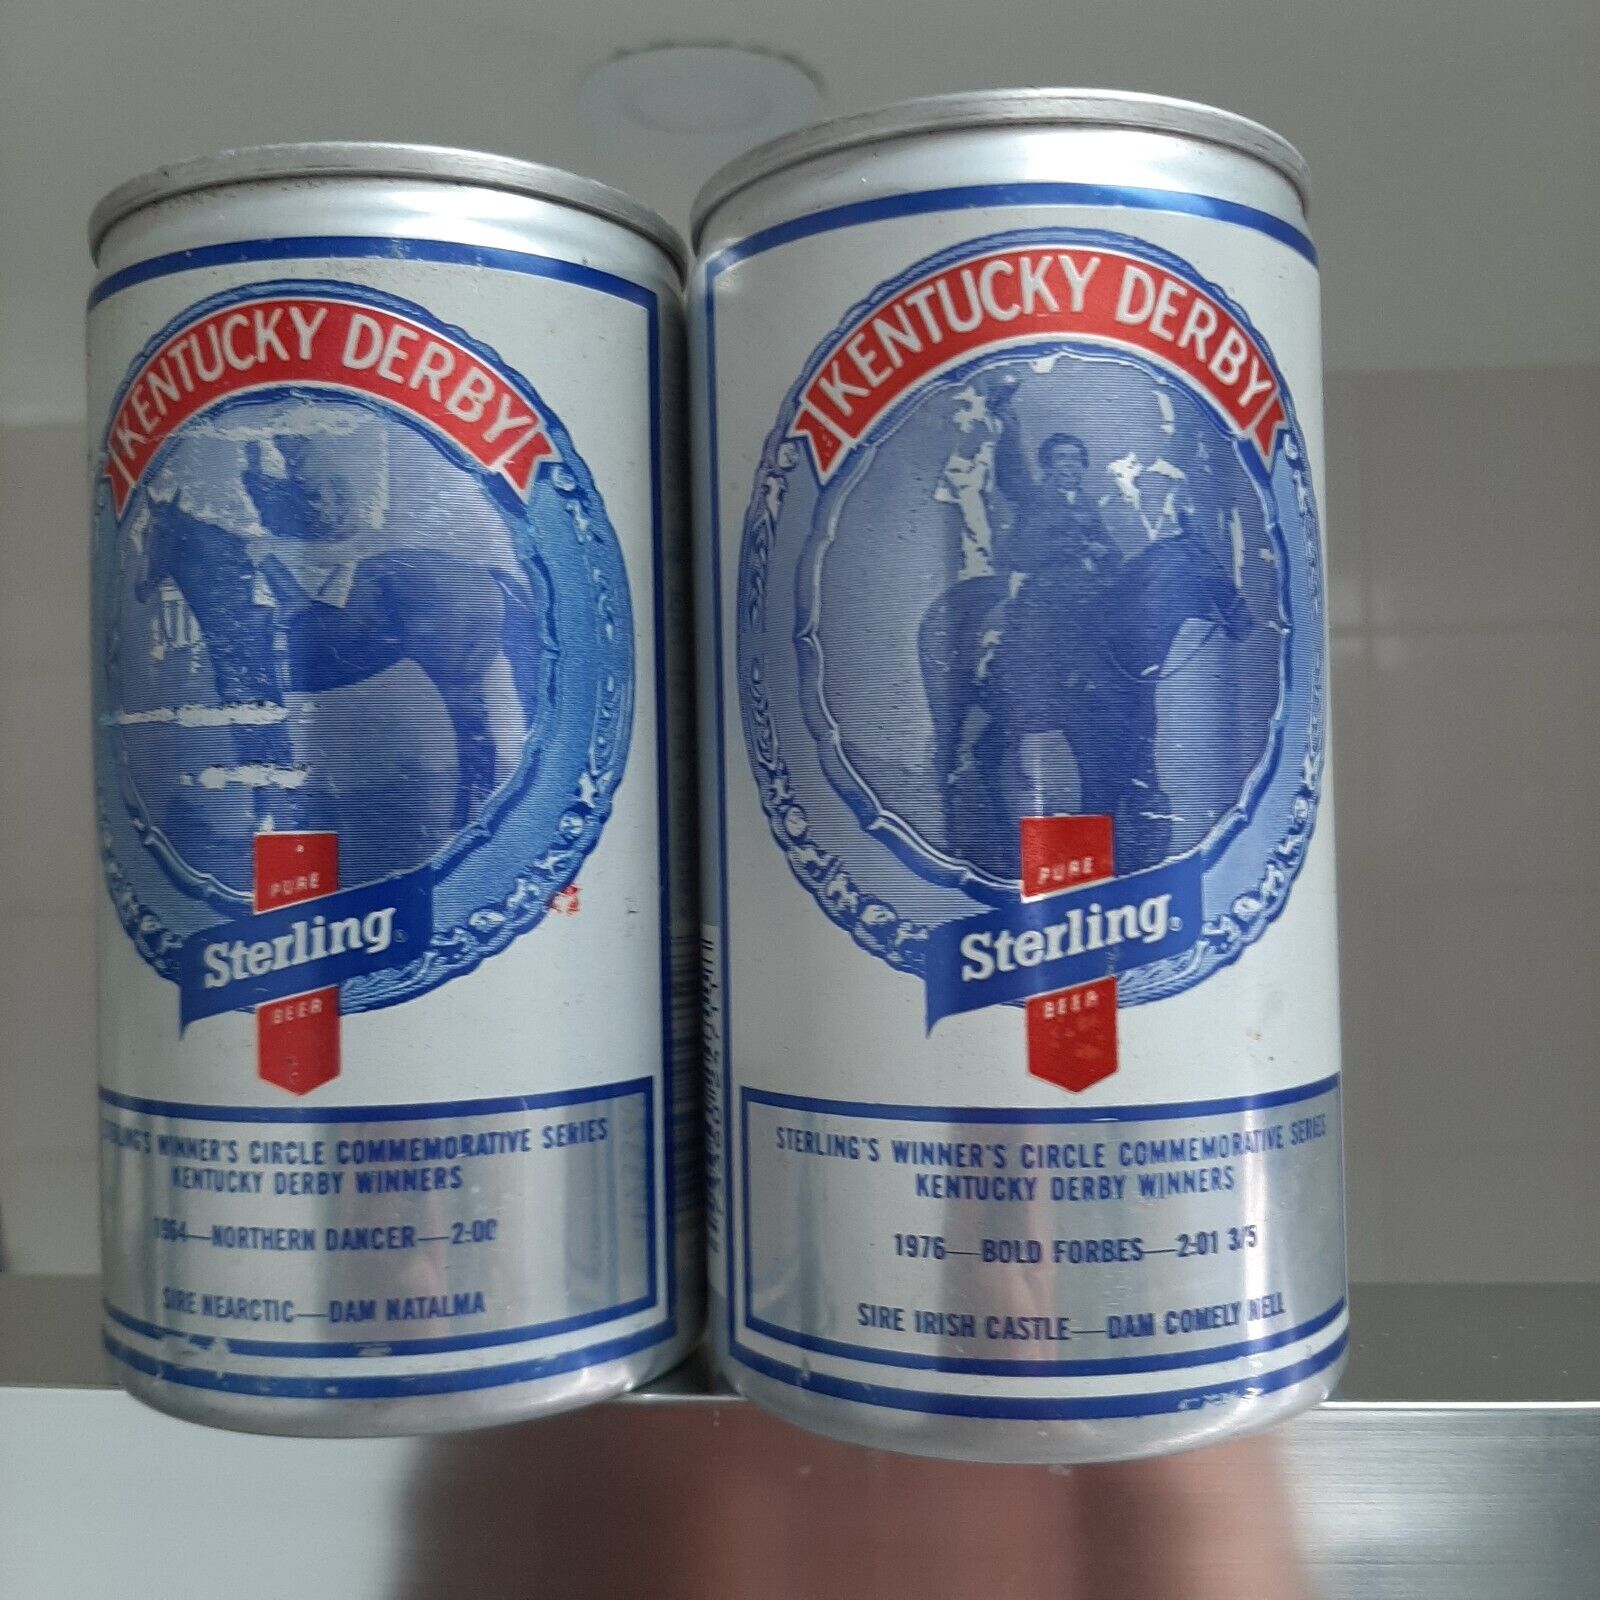 STERLING KENTUCKY DERBY SERIES 1964 NorthernDancer & 1976 Bold Forbes BEER CANS 